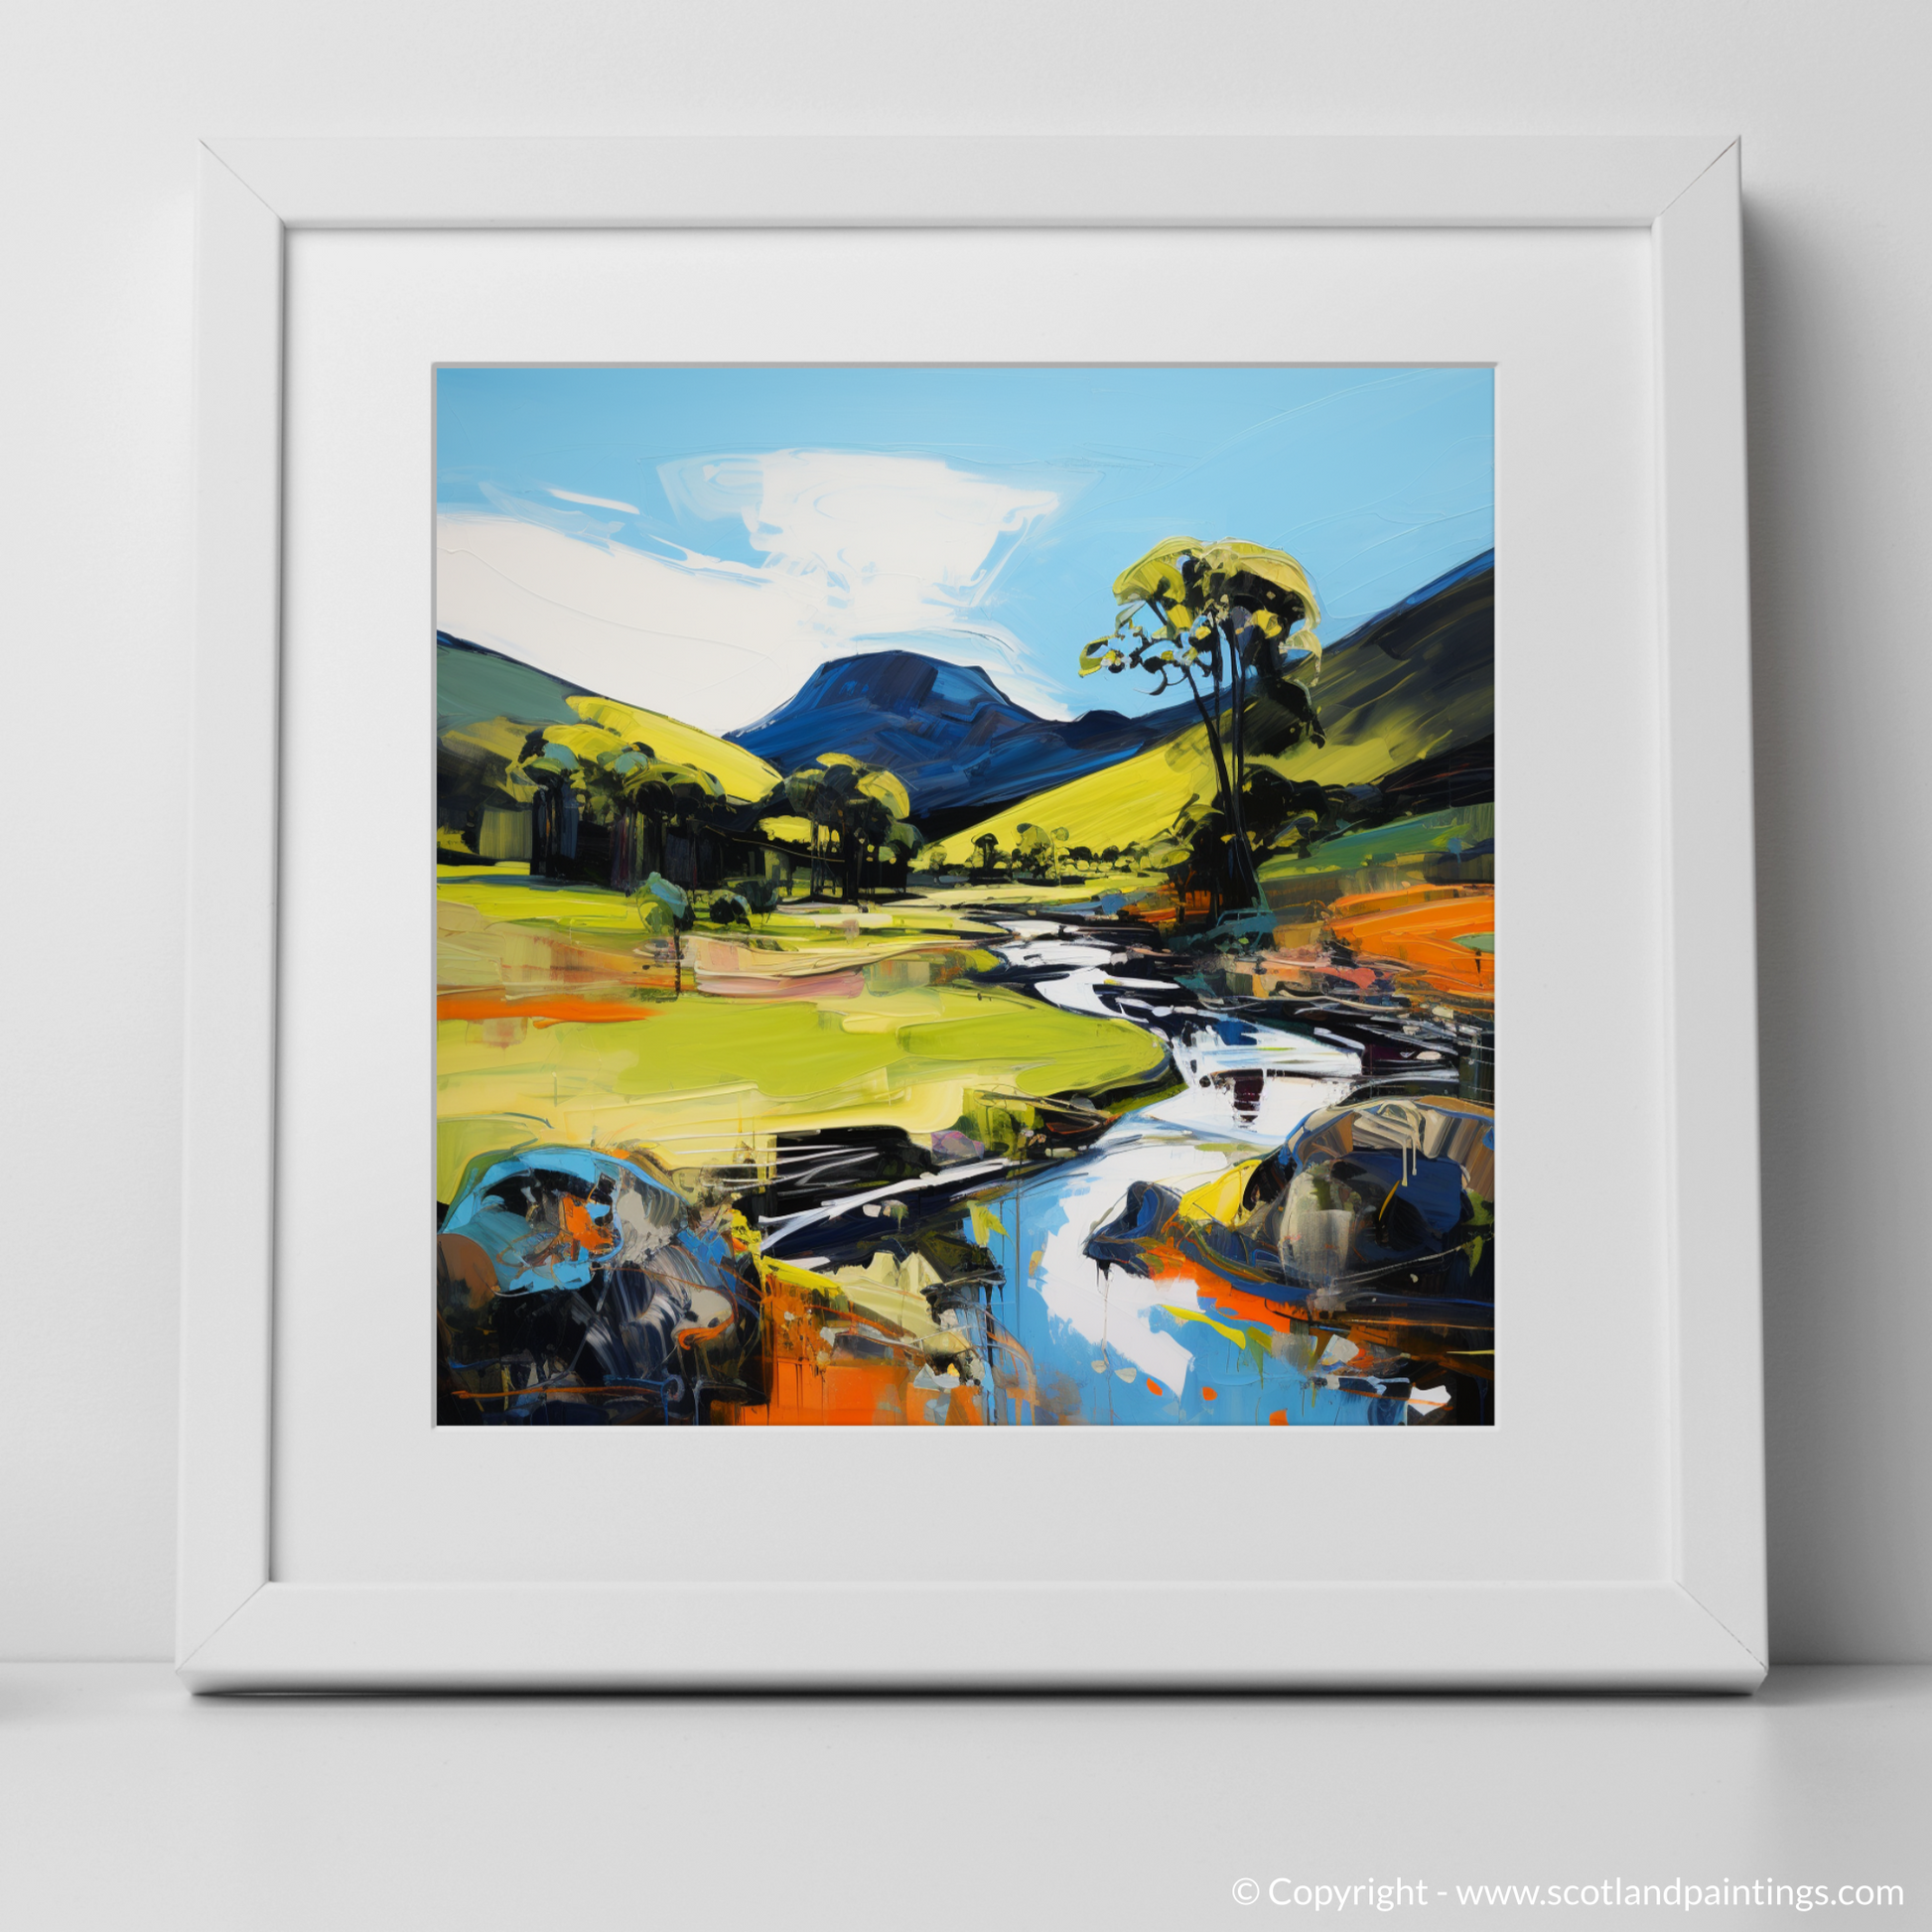 Art Print of Glen Esk, Angus in summer with a white frame